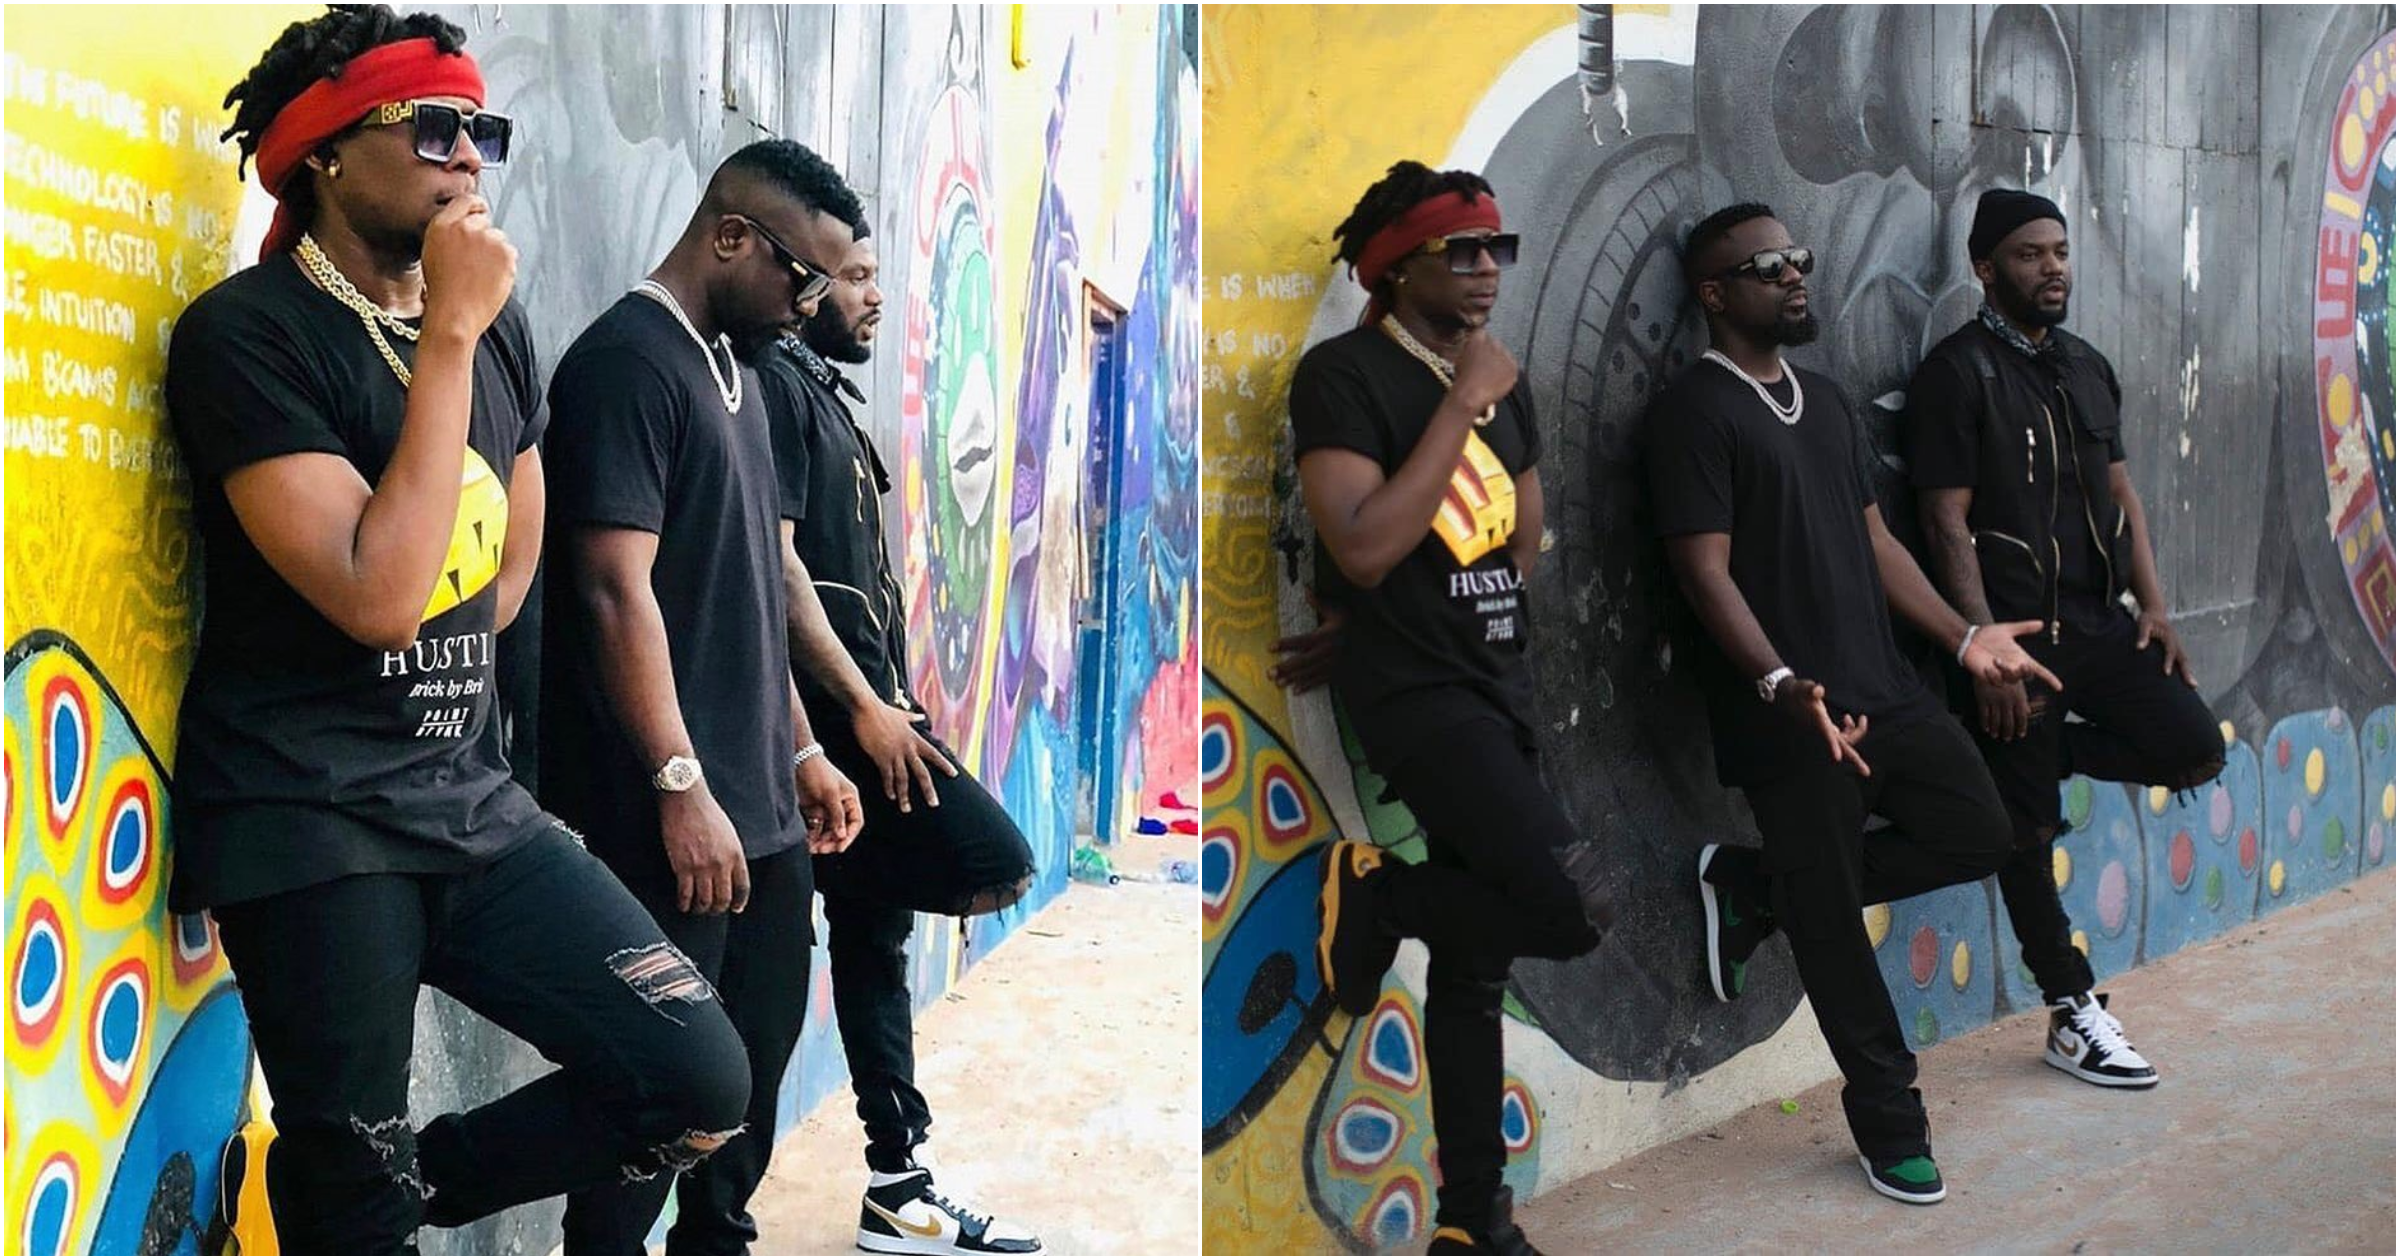 Sarkodie: Fan calls rapper stingy on set of music video with R2Bees